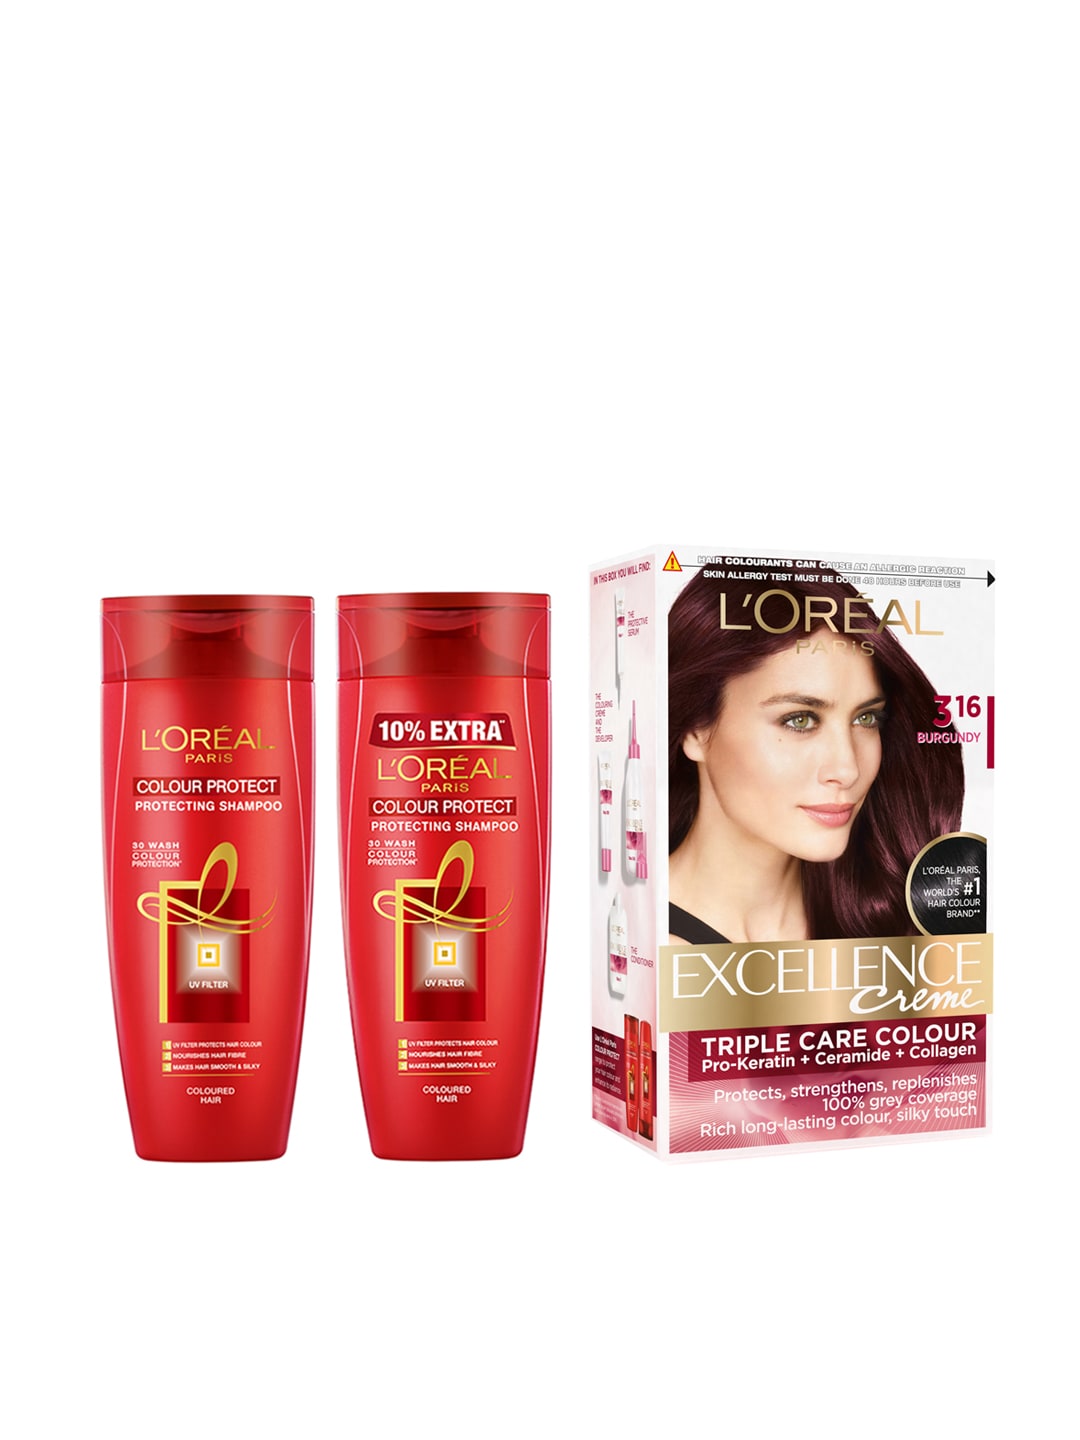 L'Oreal Paris Pack of 2 Colour Protect Shampoo & Excellence Creme Hair Color - Burgundy Price in India